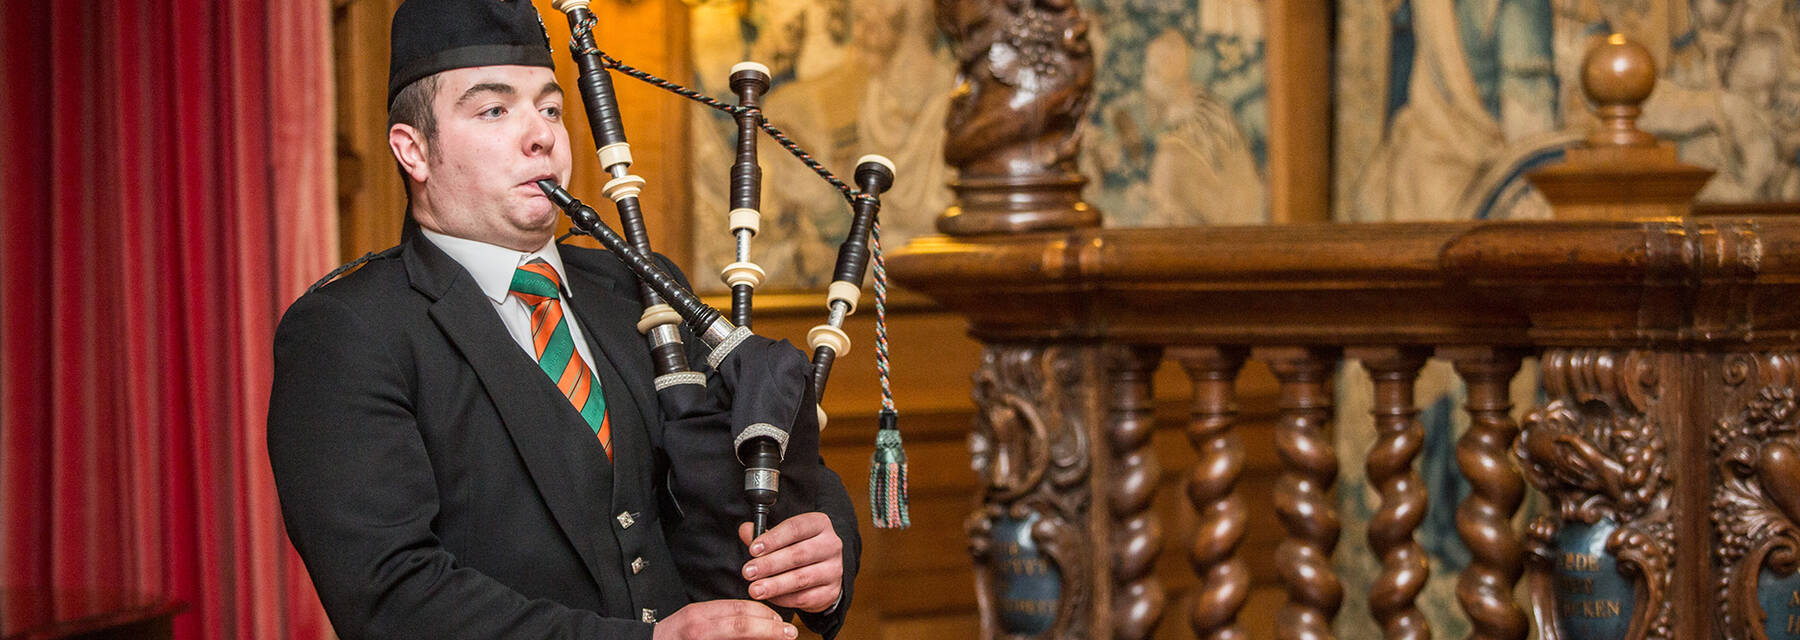 Piper playing at Fyvie Castle